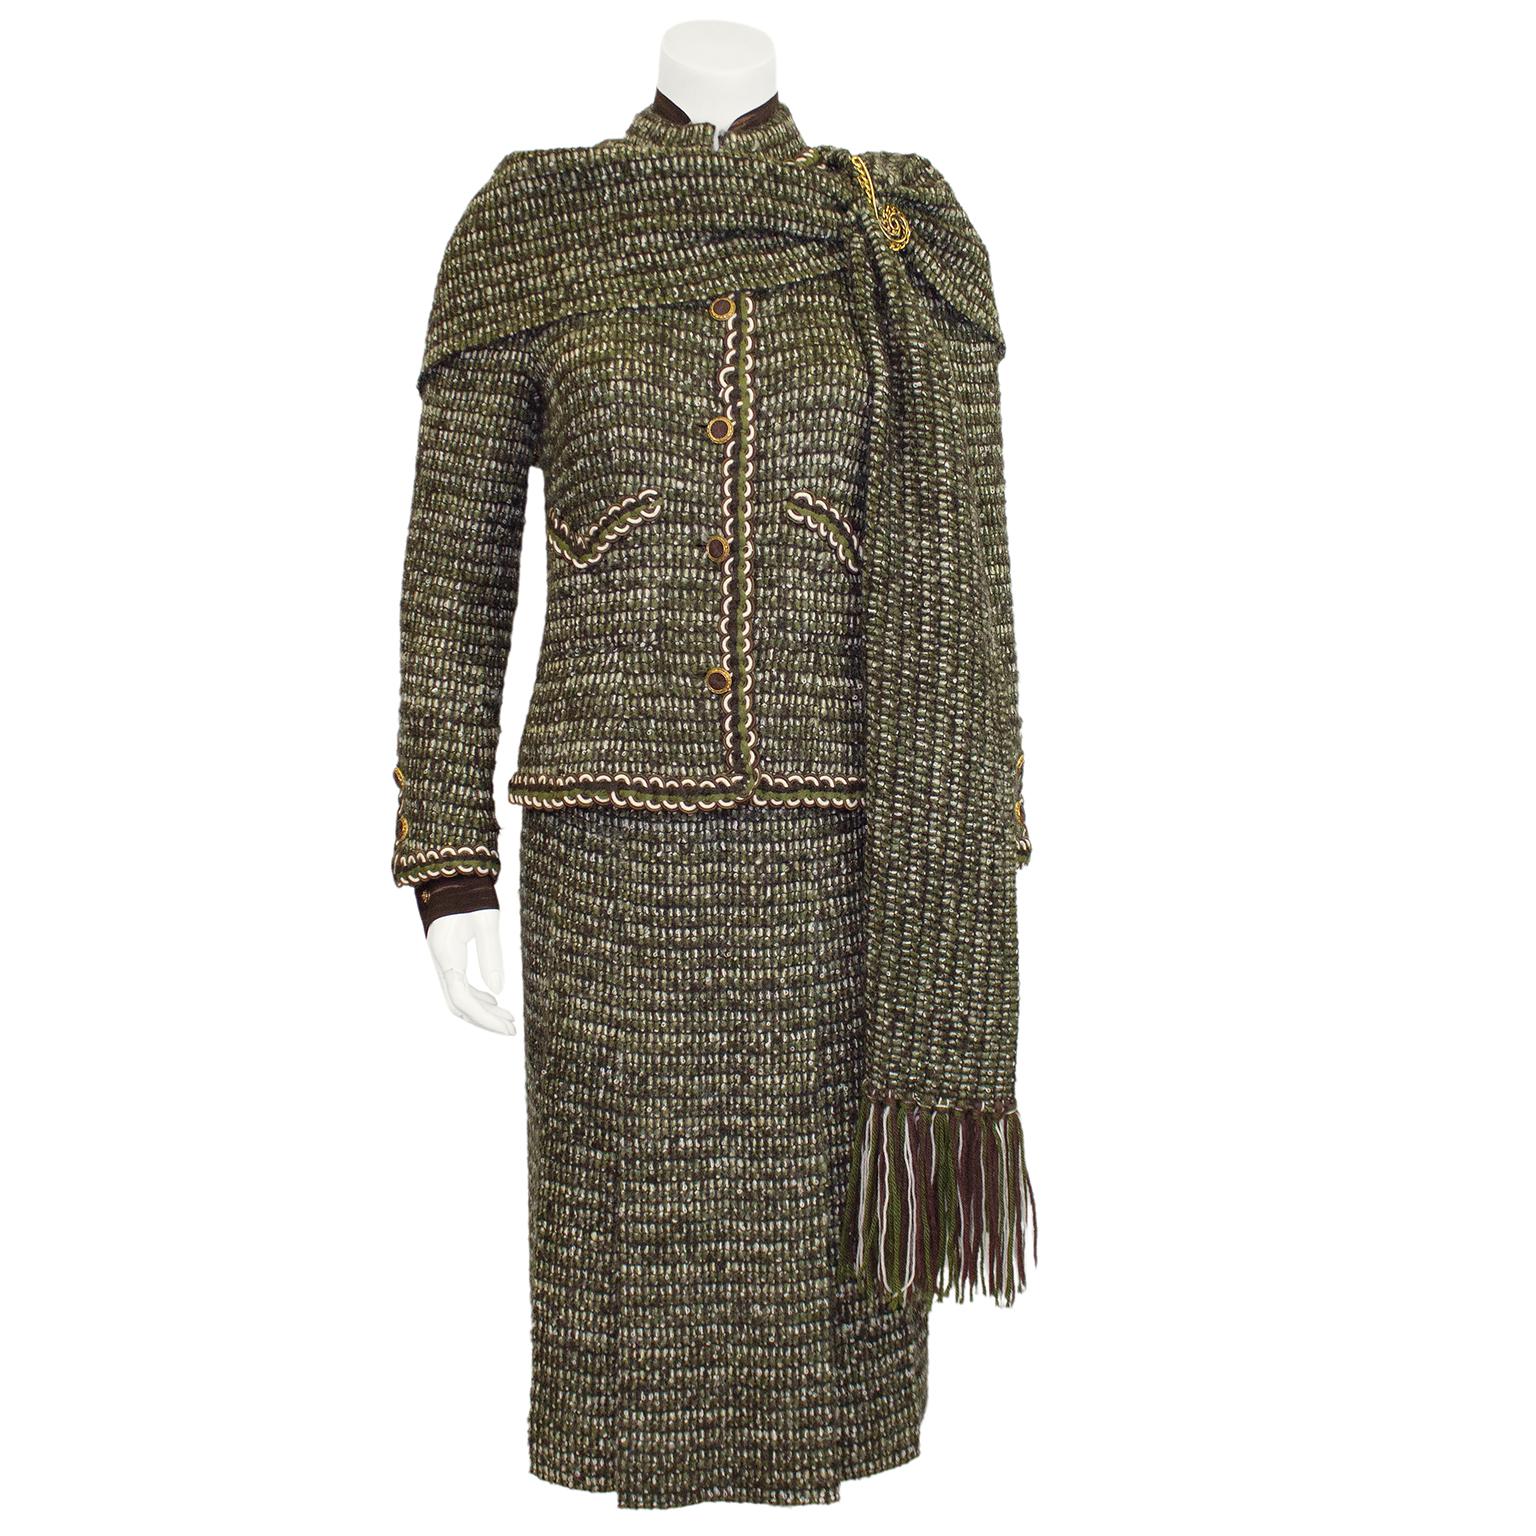 1981 Chanel Haute Couture Green and Brown Tweed 4 Piece Skirt Suit For Sale